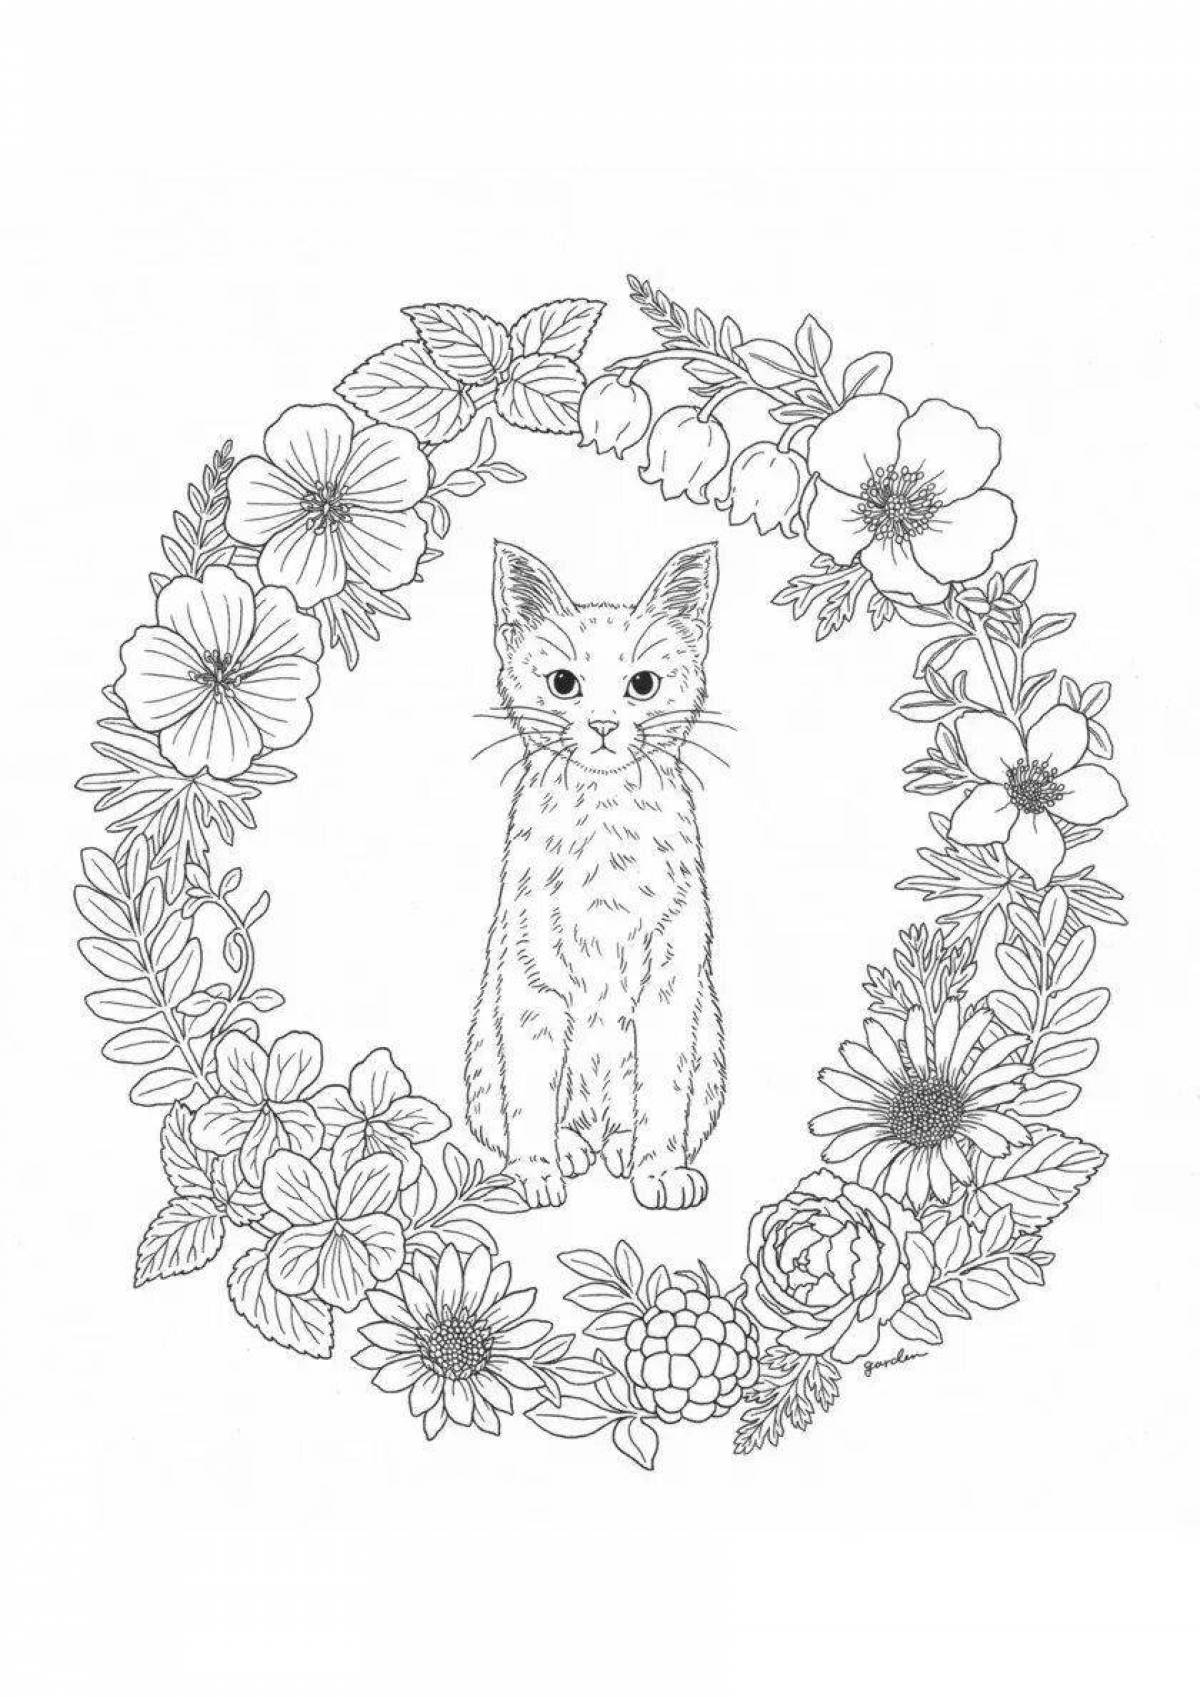 Animated cat with flowers